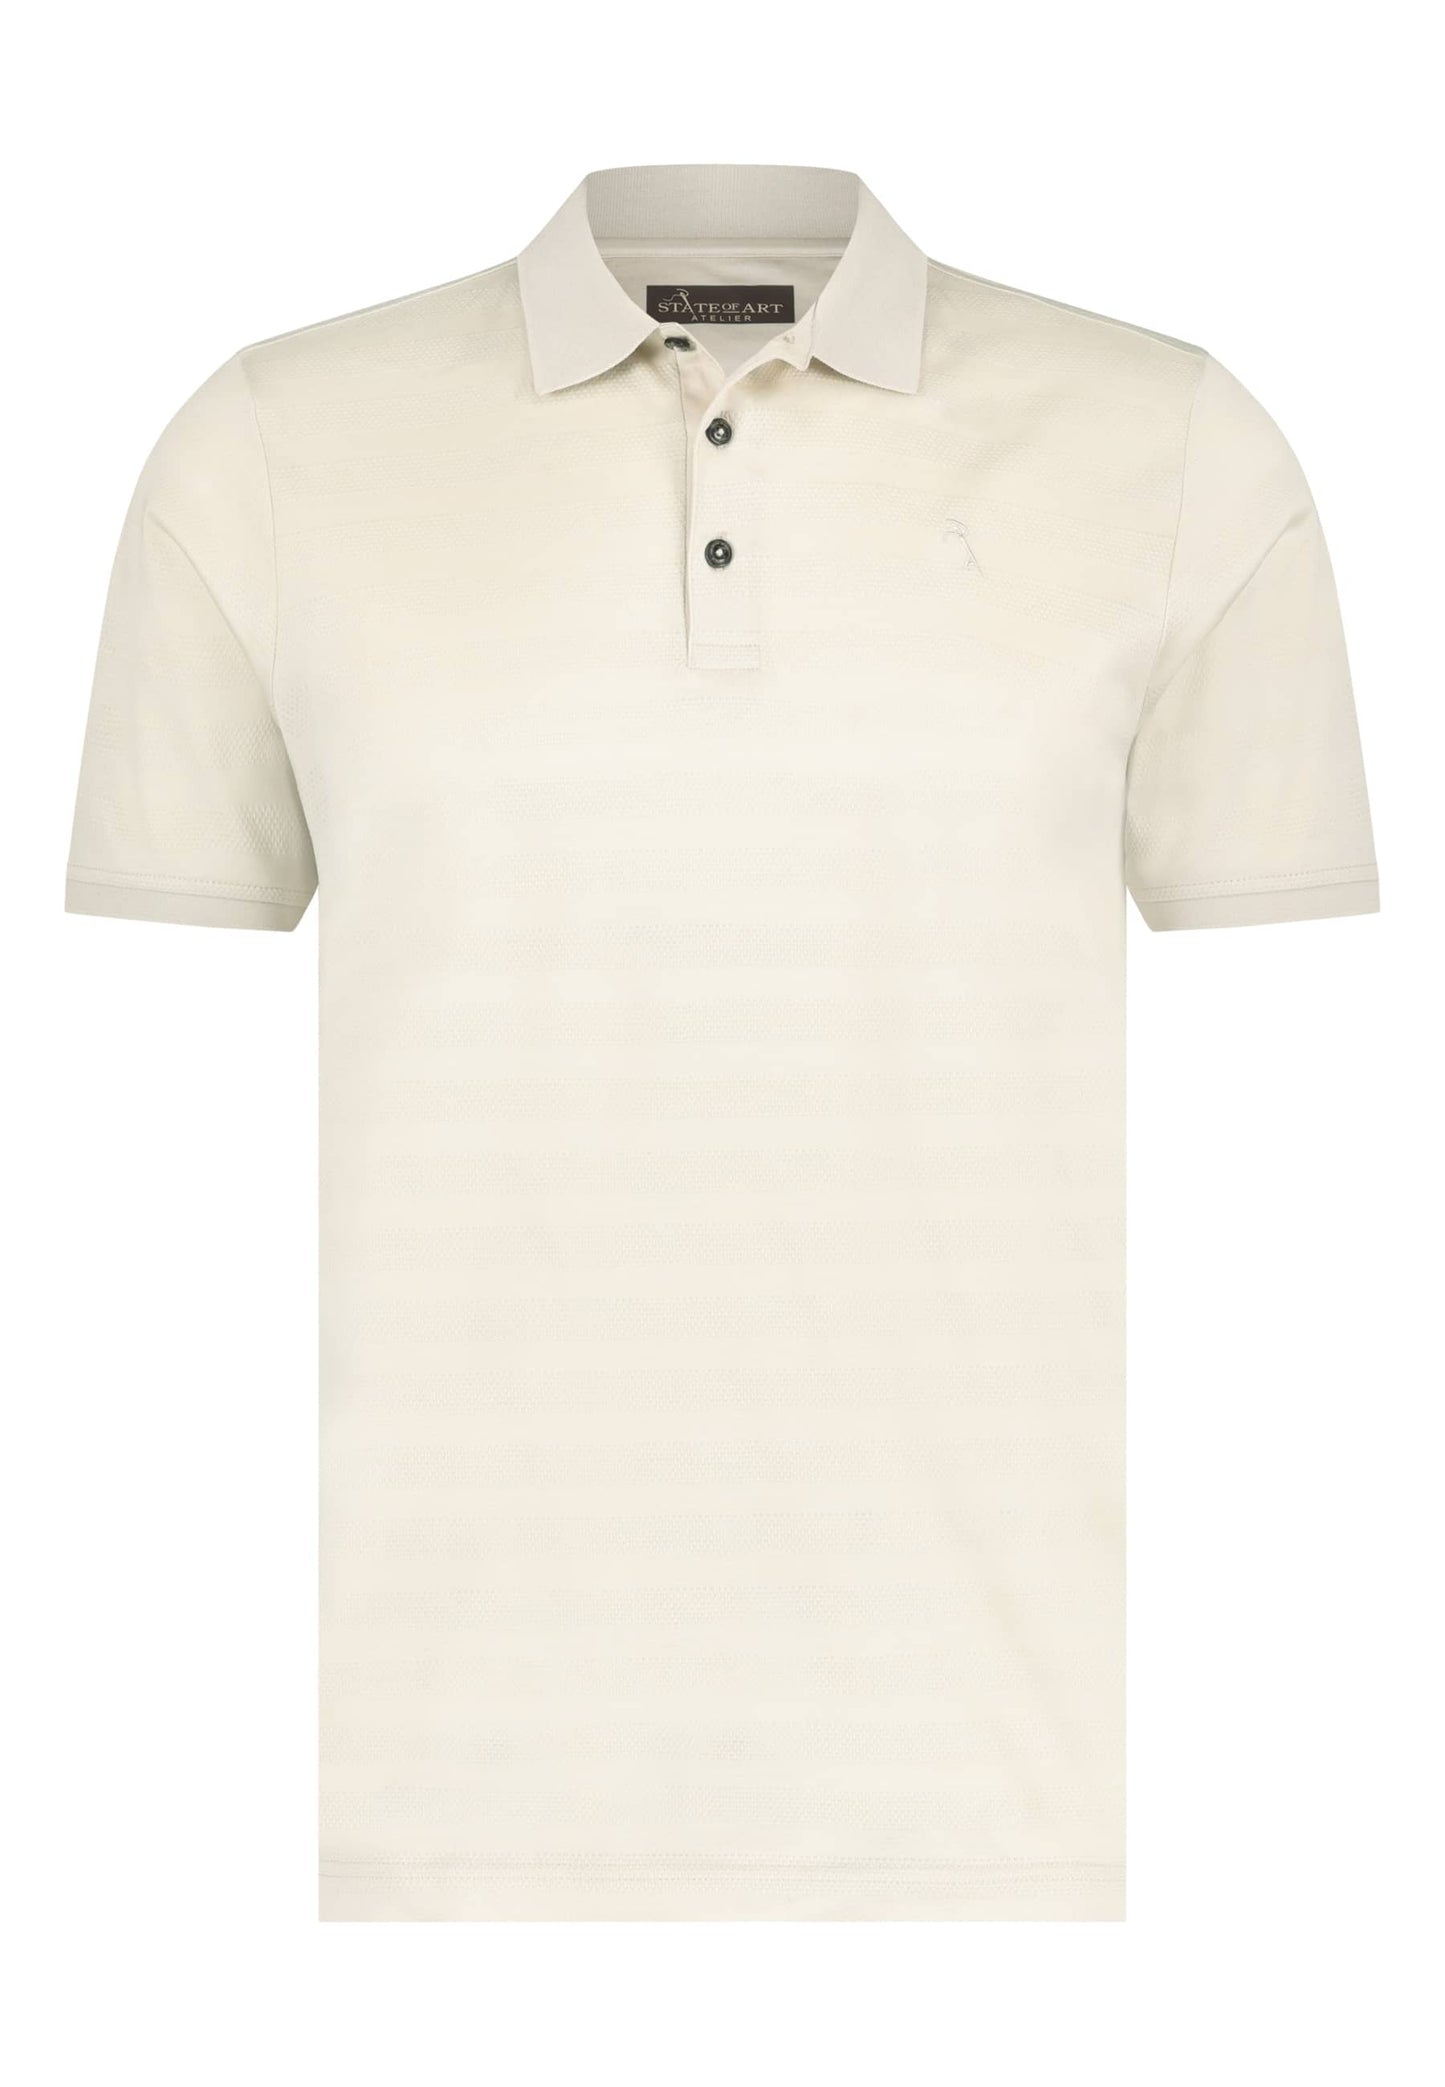 Eggshell structured mercerized cotton regular fit polo State of Art - 13768/1400